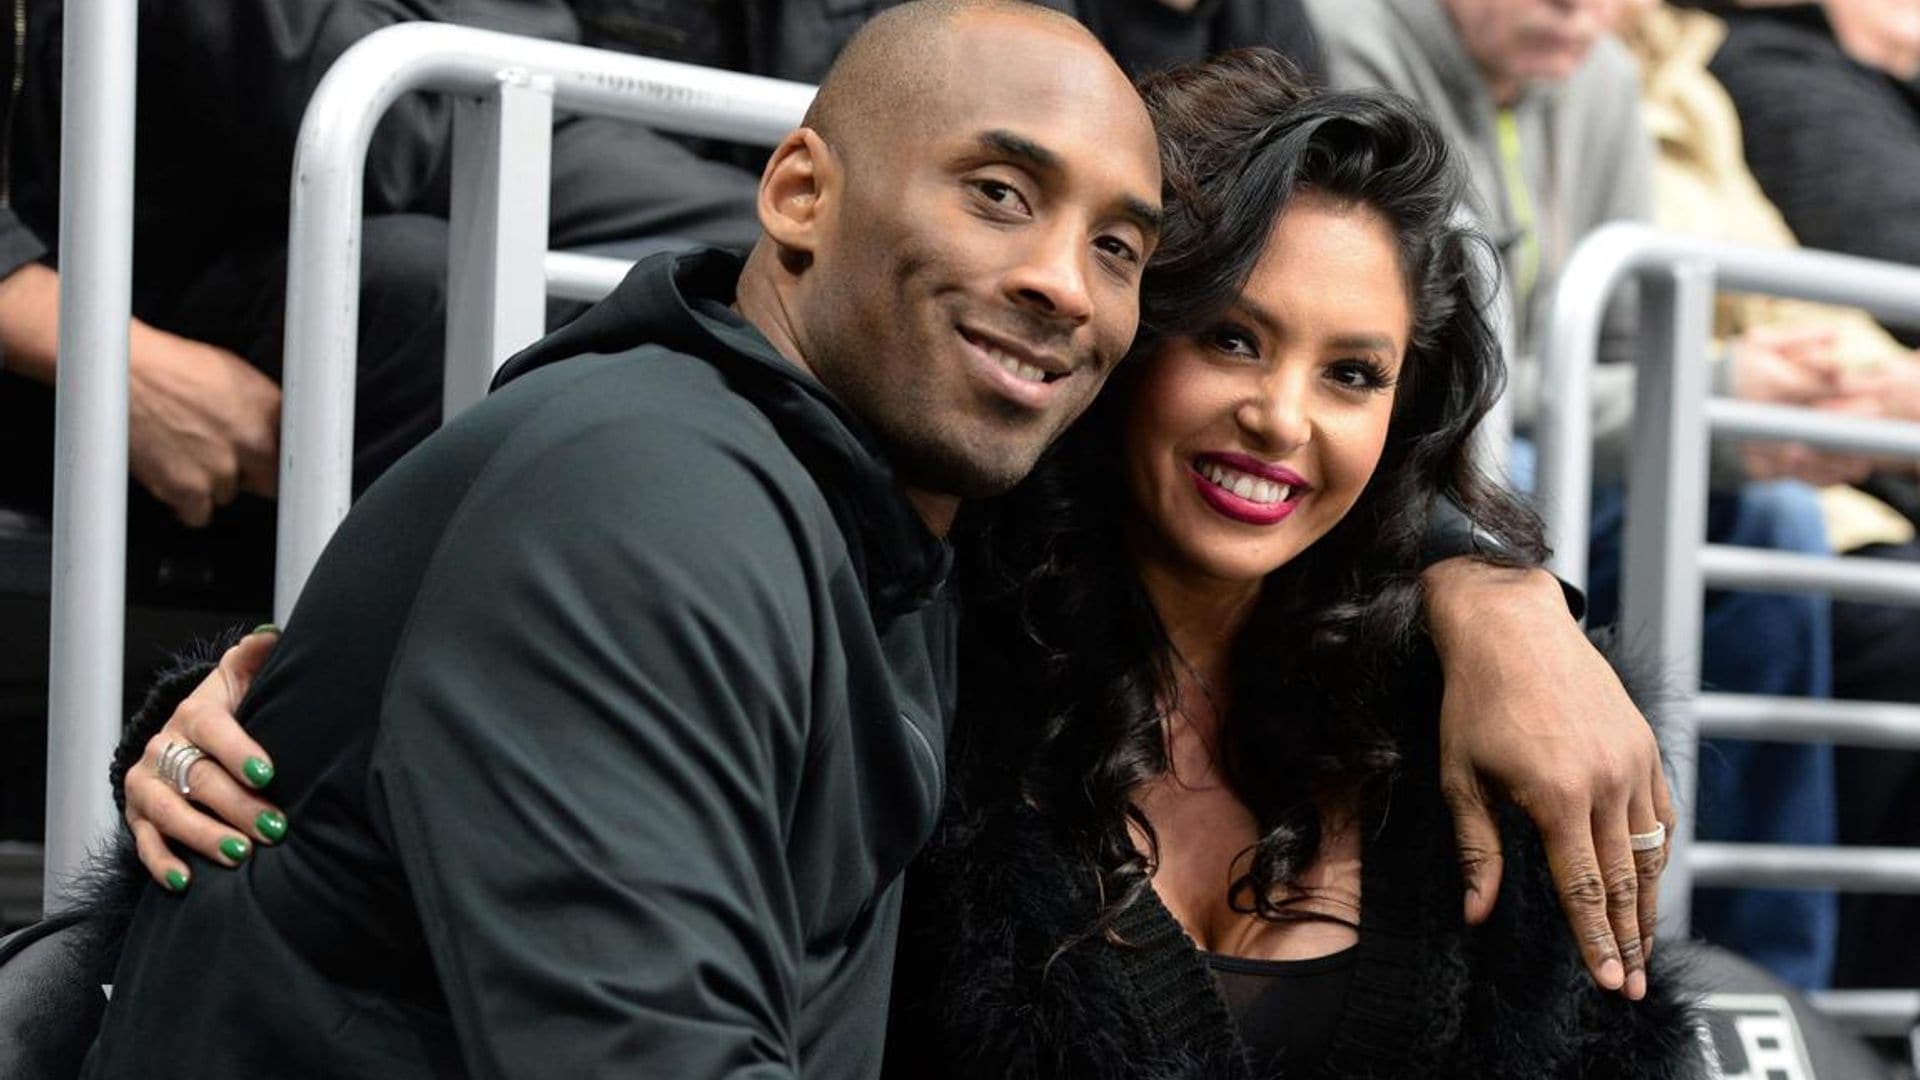 Kobe Bryant went through a lot of trouble to give wife Vanessa this gift